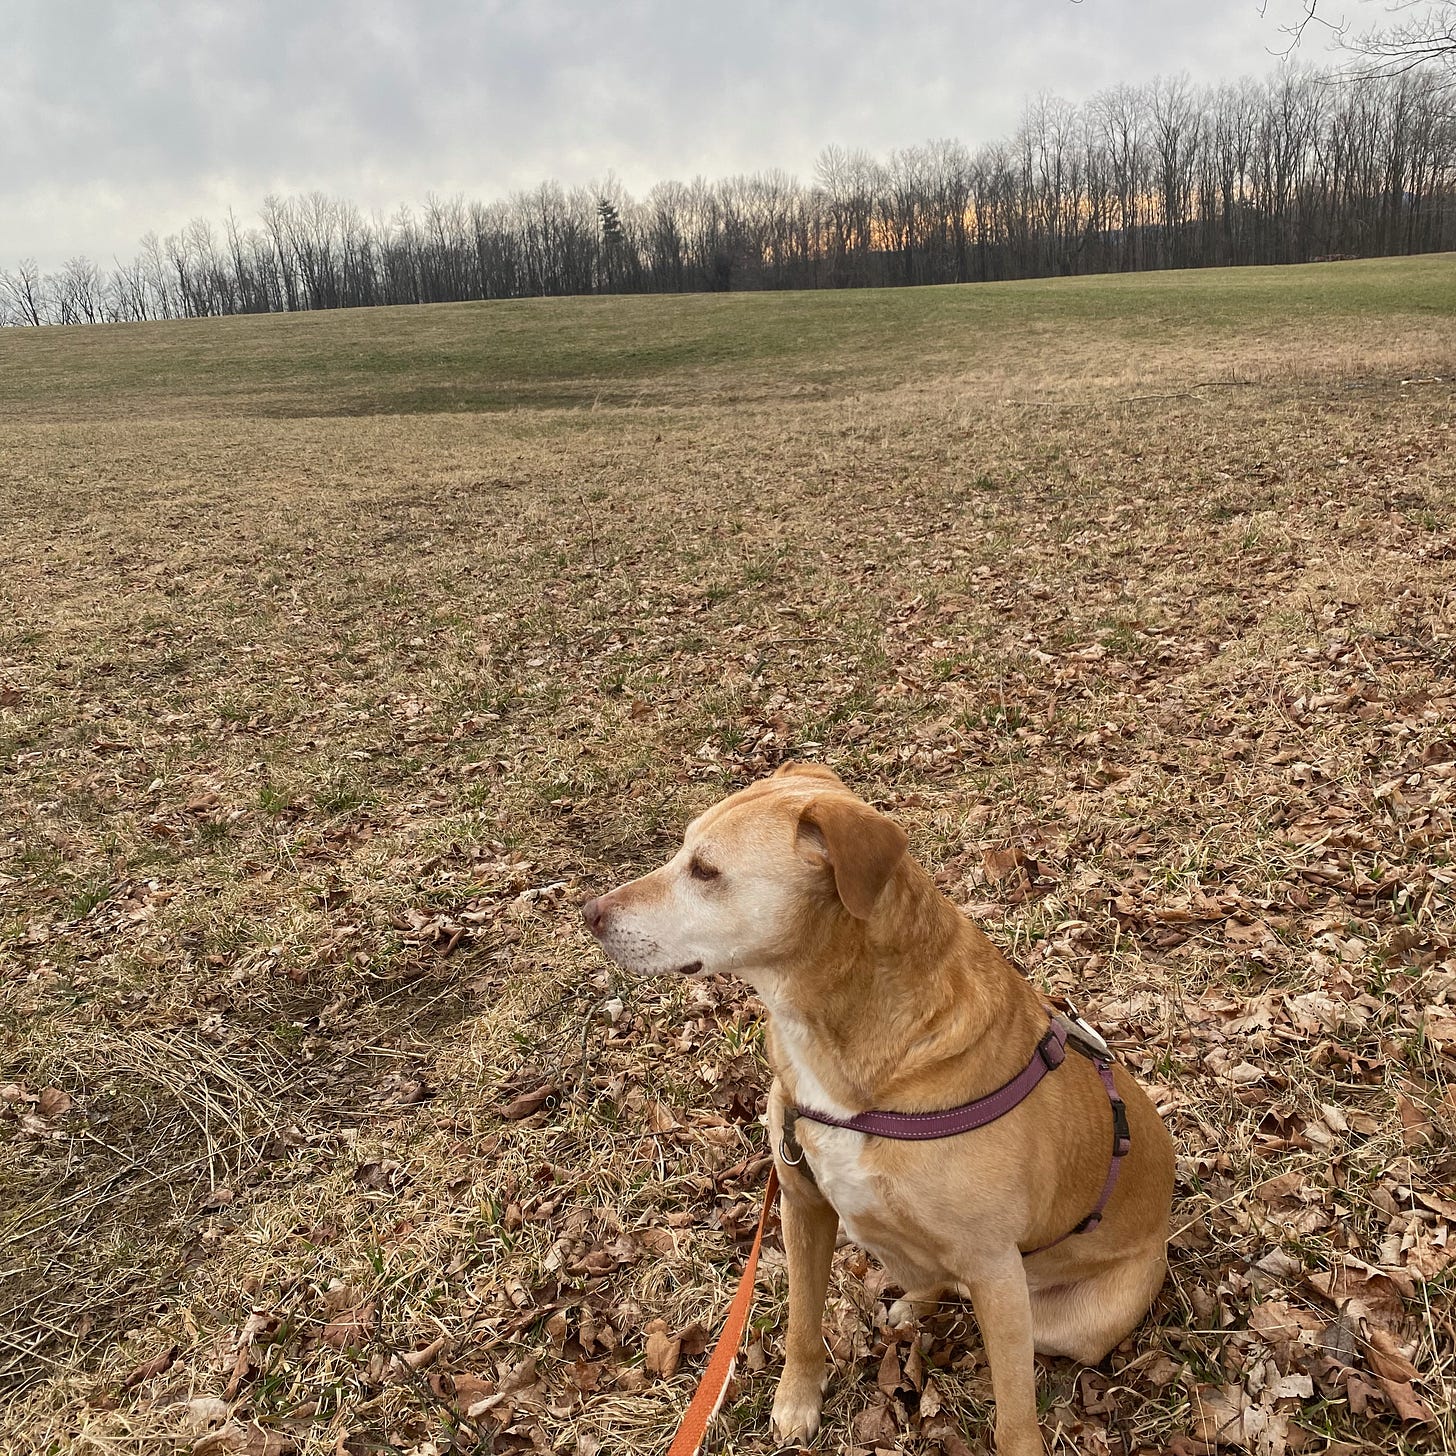 Nessa sitting on a brown field under a grey sky, with a band of gold sunrise along the horizon behind the dark treeline.